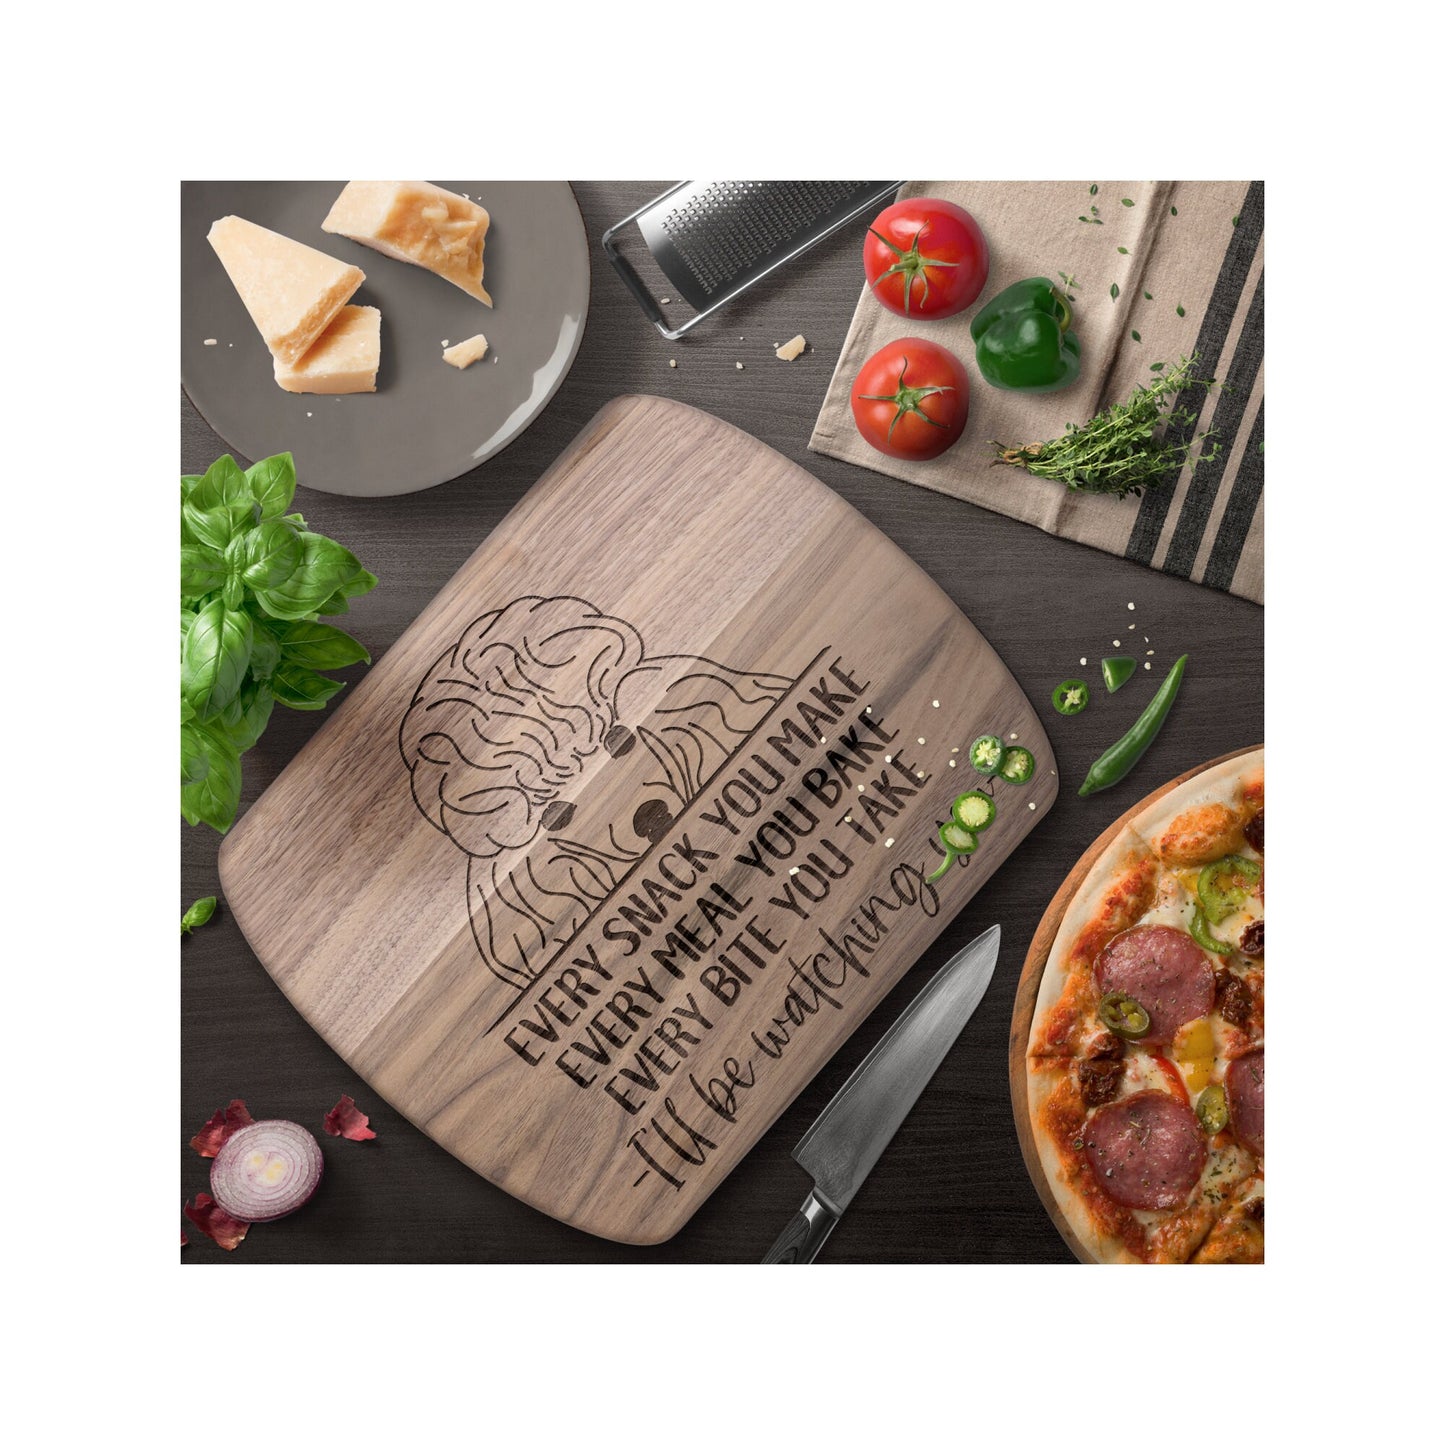 Poodle Snack Funny Cutting Board for Dog Mom, Dog Lover Wood Serving Board, Dog Dad Charcuterie Board, Wooden Chopping Board Gifts for Him